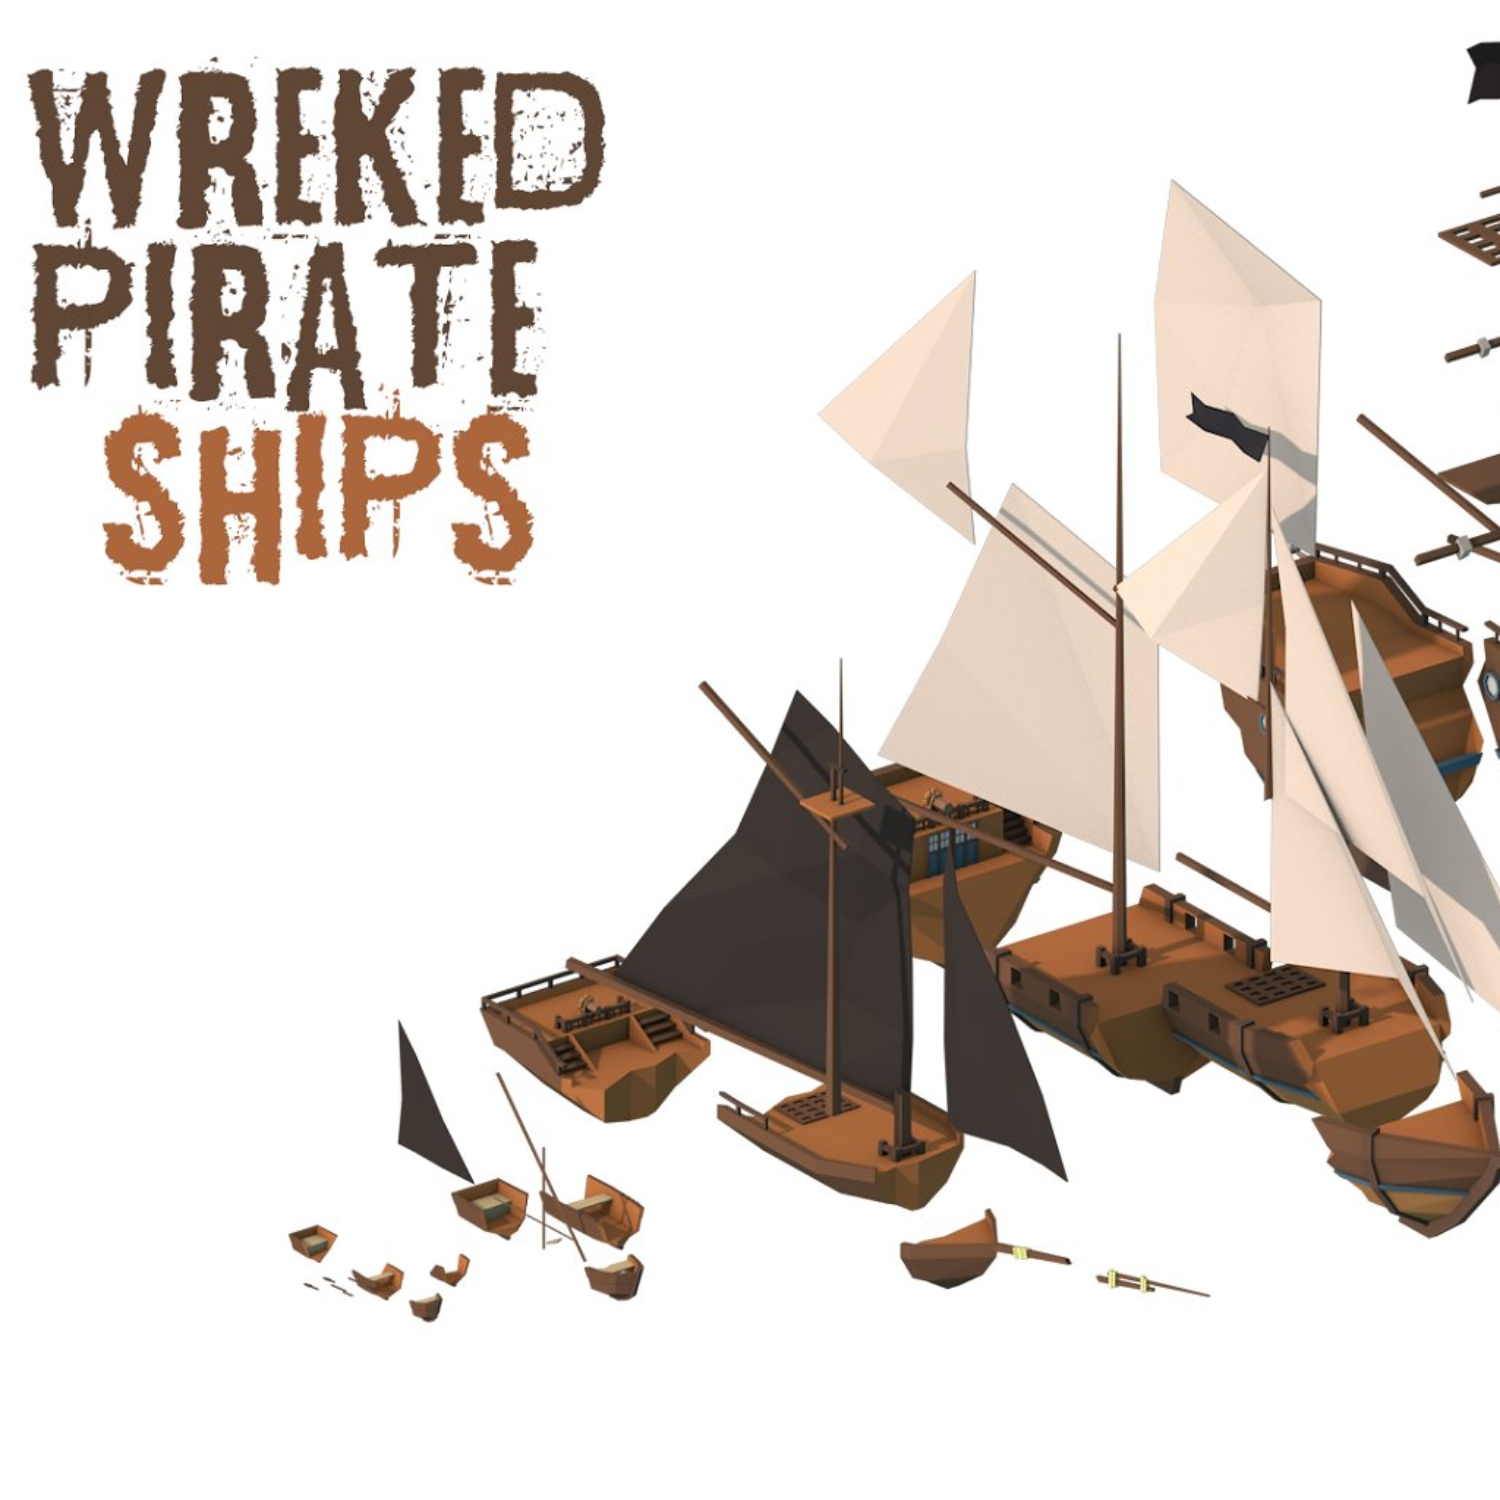 Wrecked Pirate Ships.